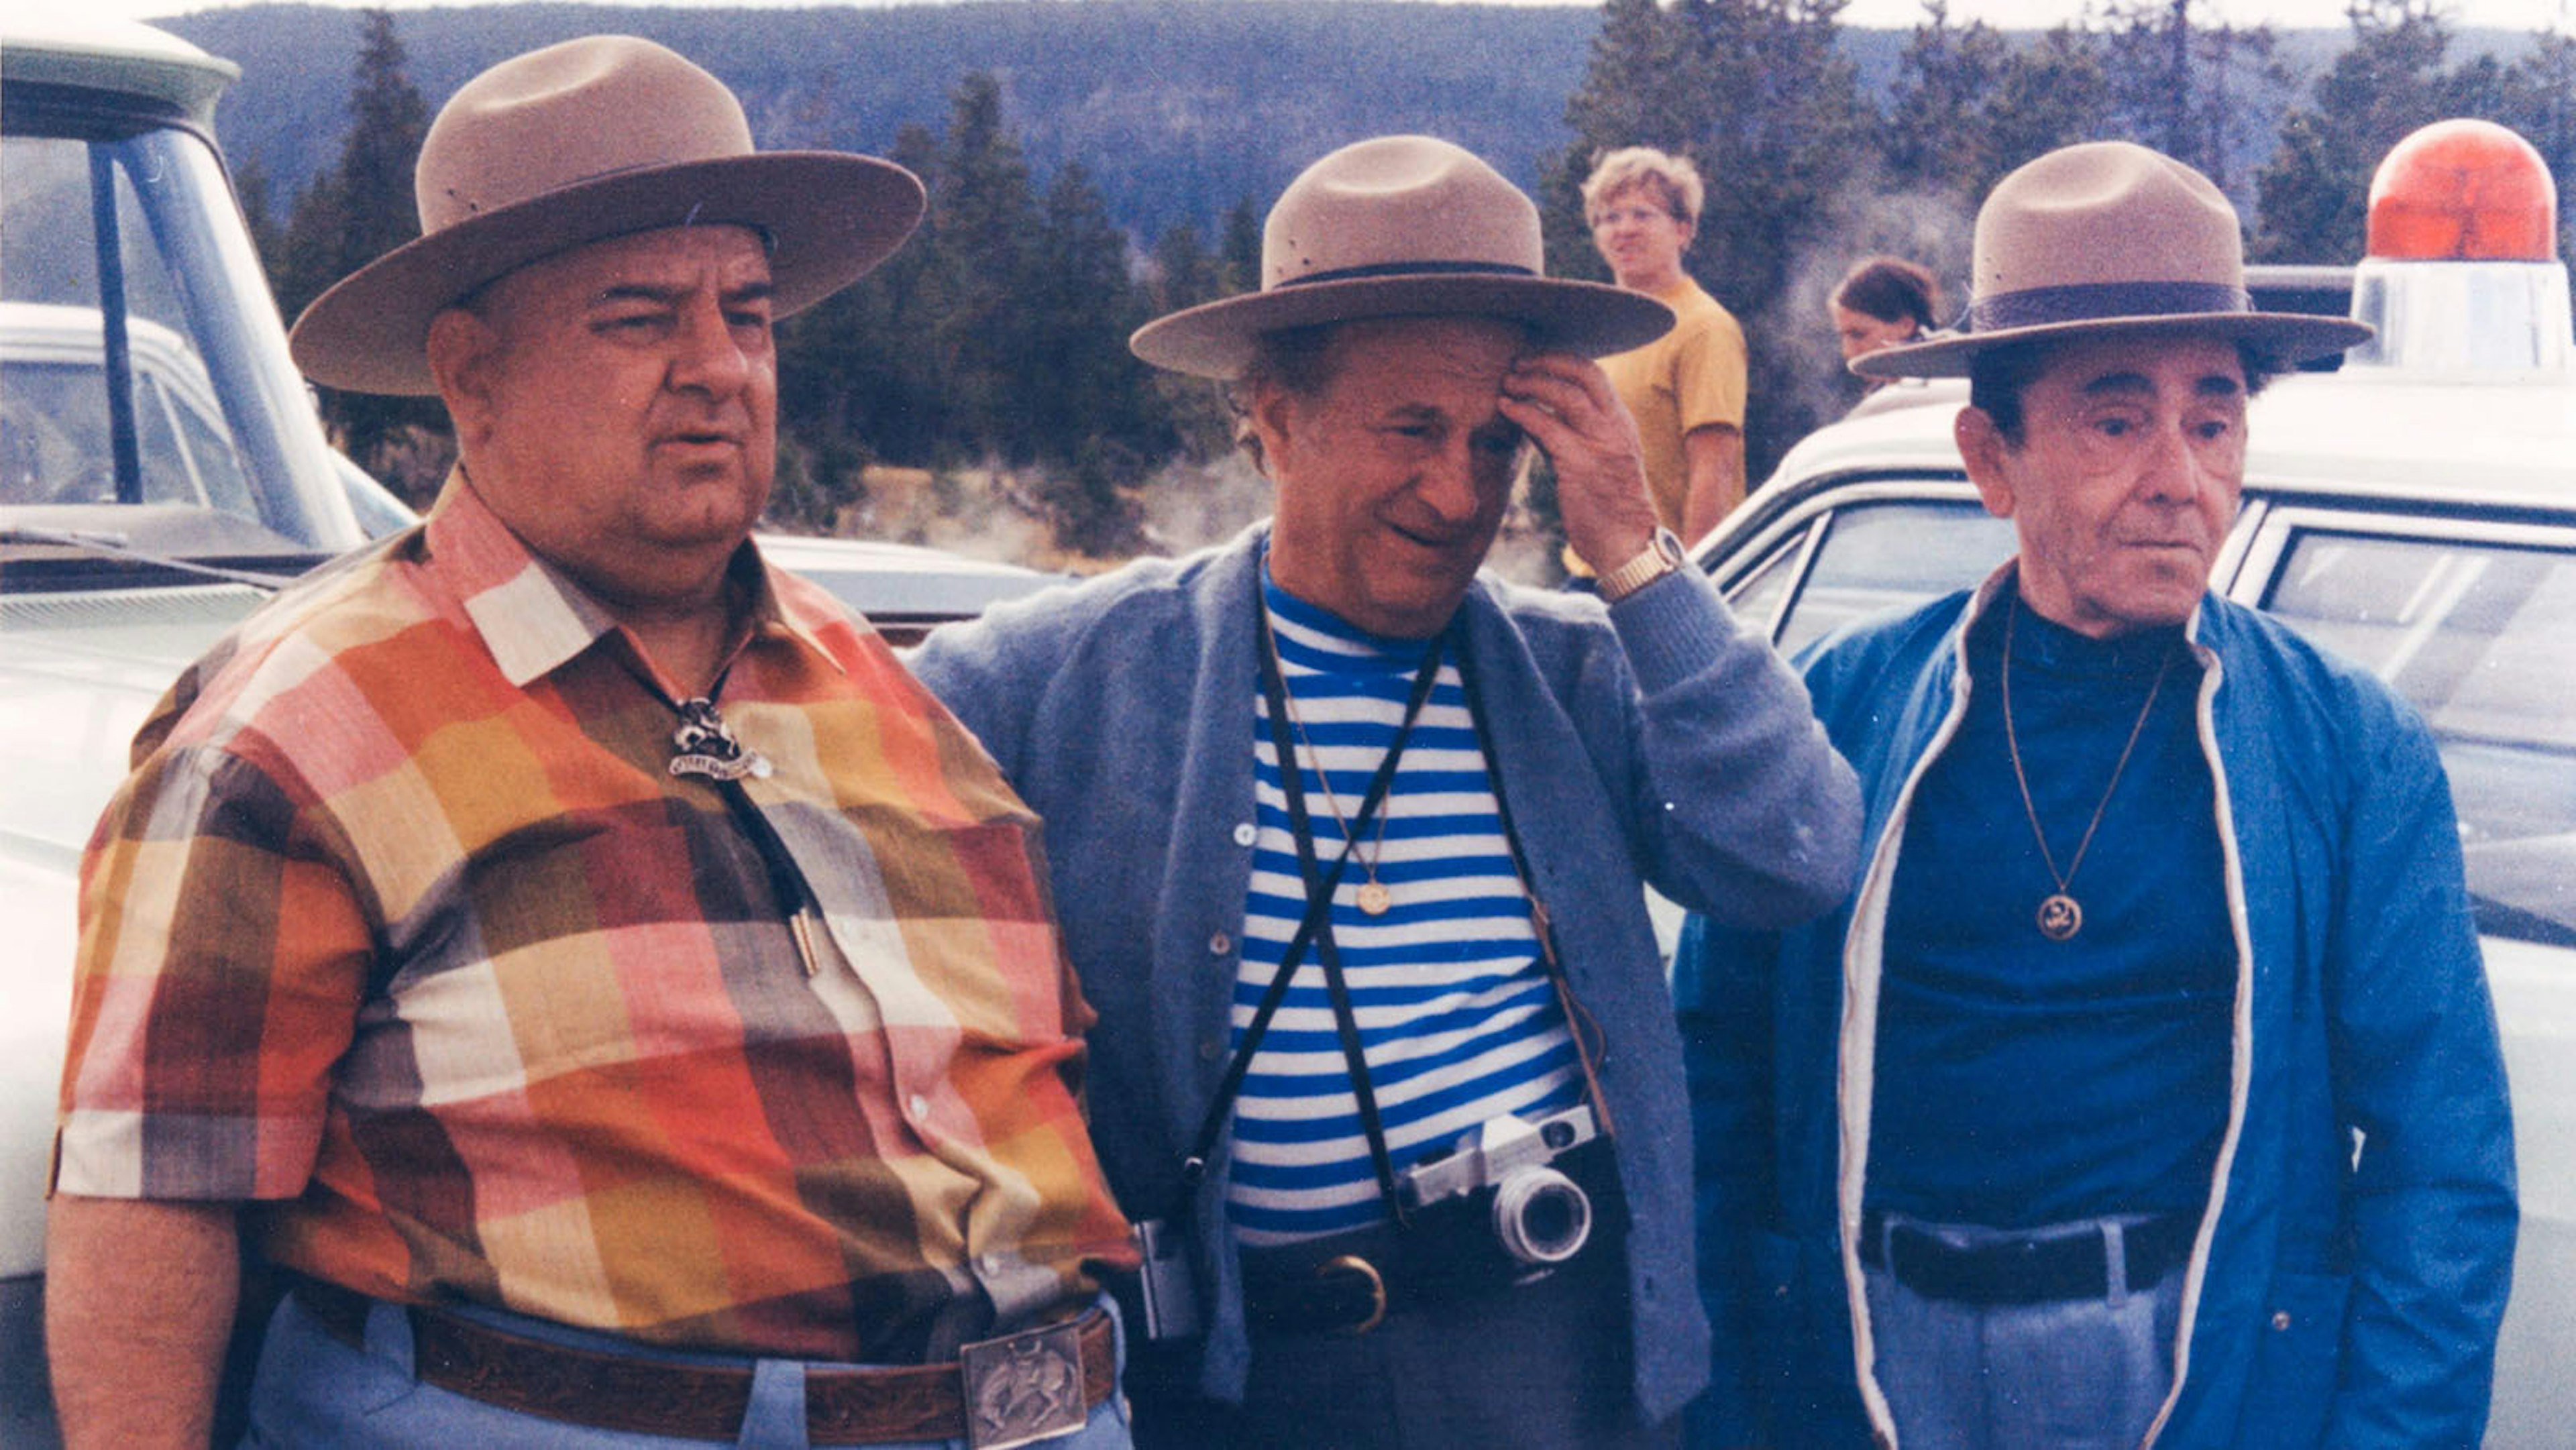 3-Stooges-at-Yellowstone-2-close-12.9.23.jpg